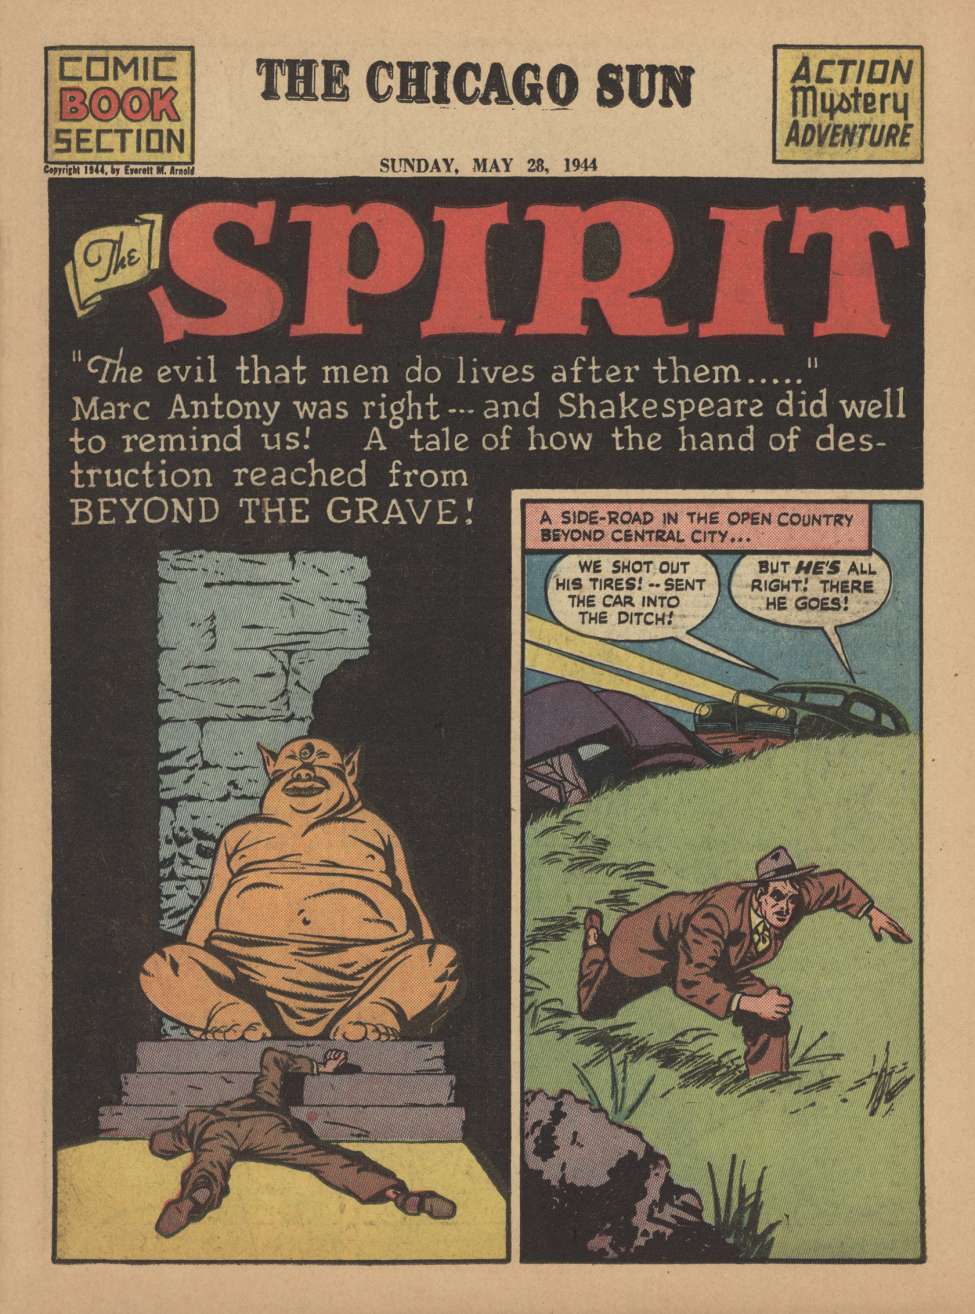 Book Cover For The Spirit (1944-05-28) - Chicago Sun